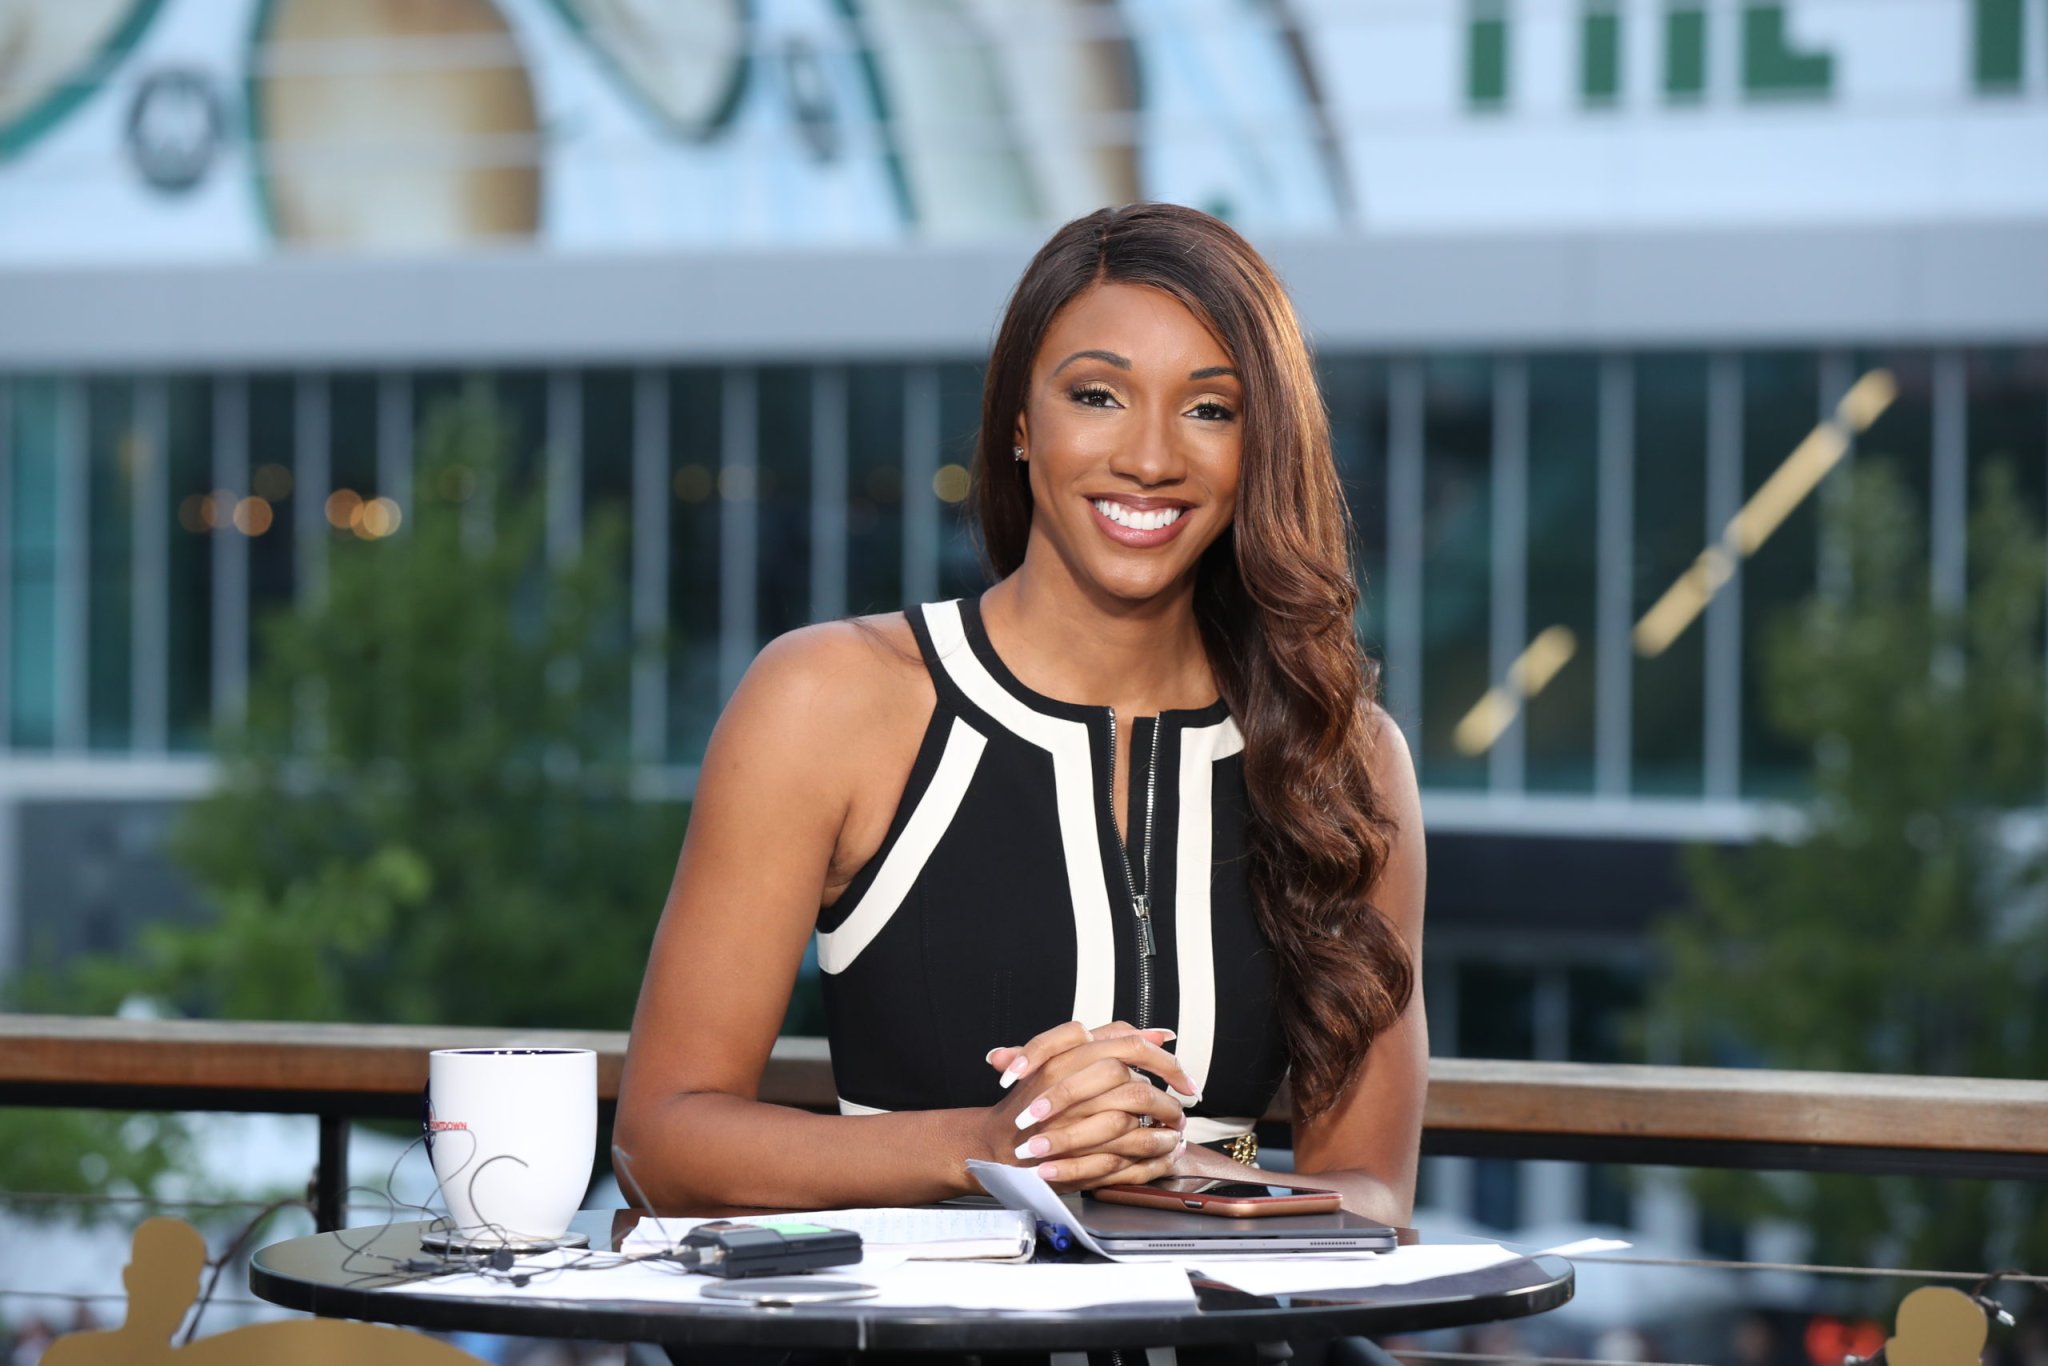 Statements from ESPN and Maria Taylor